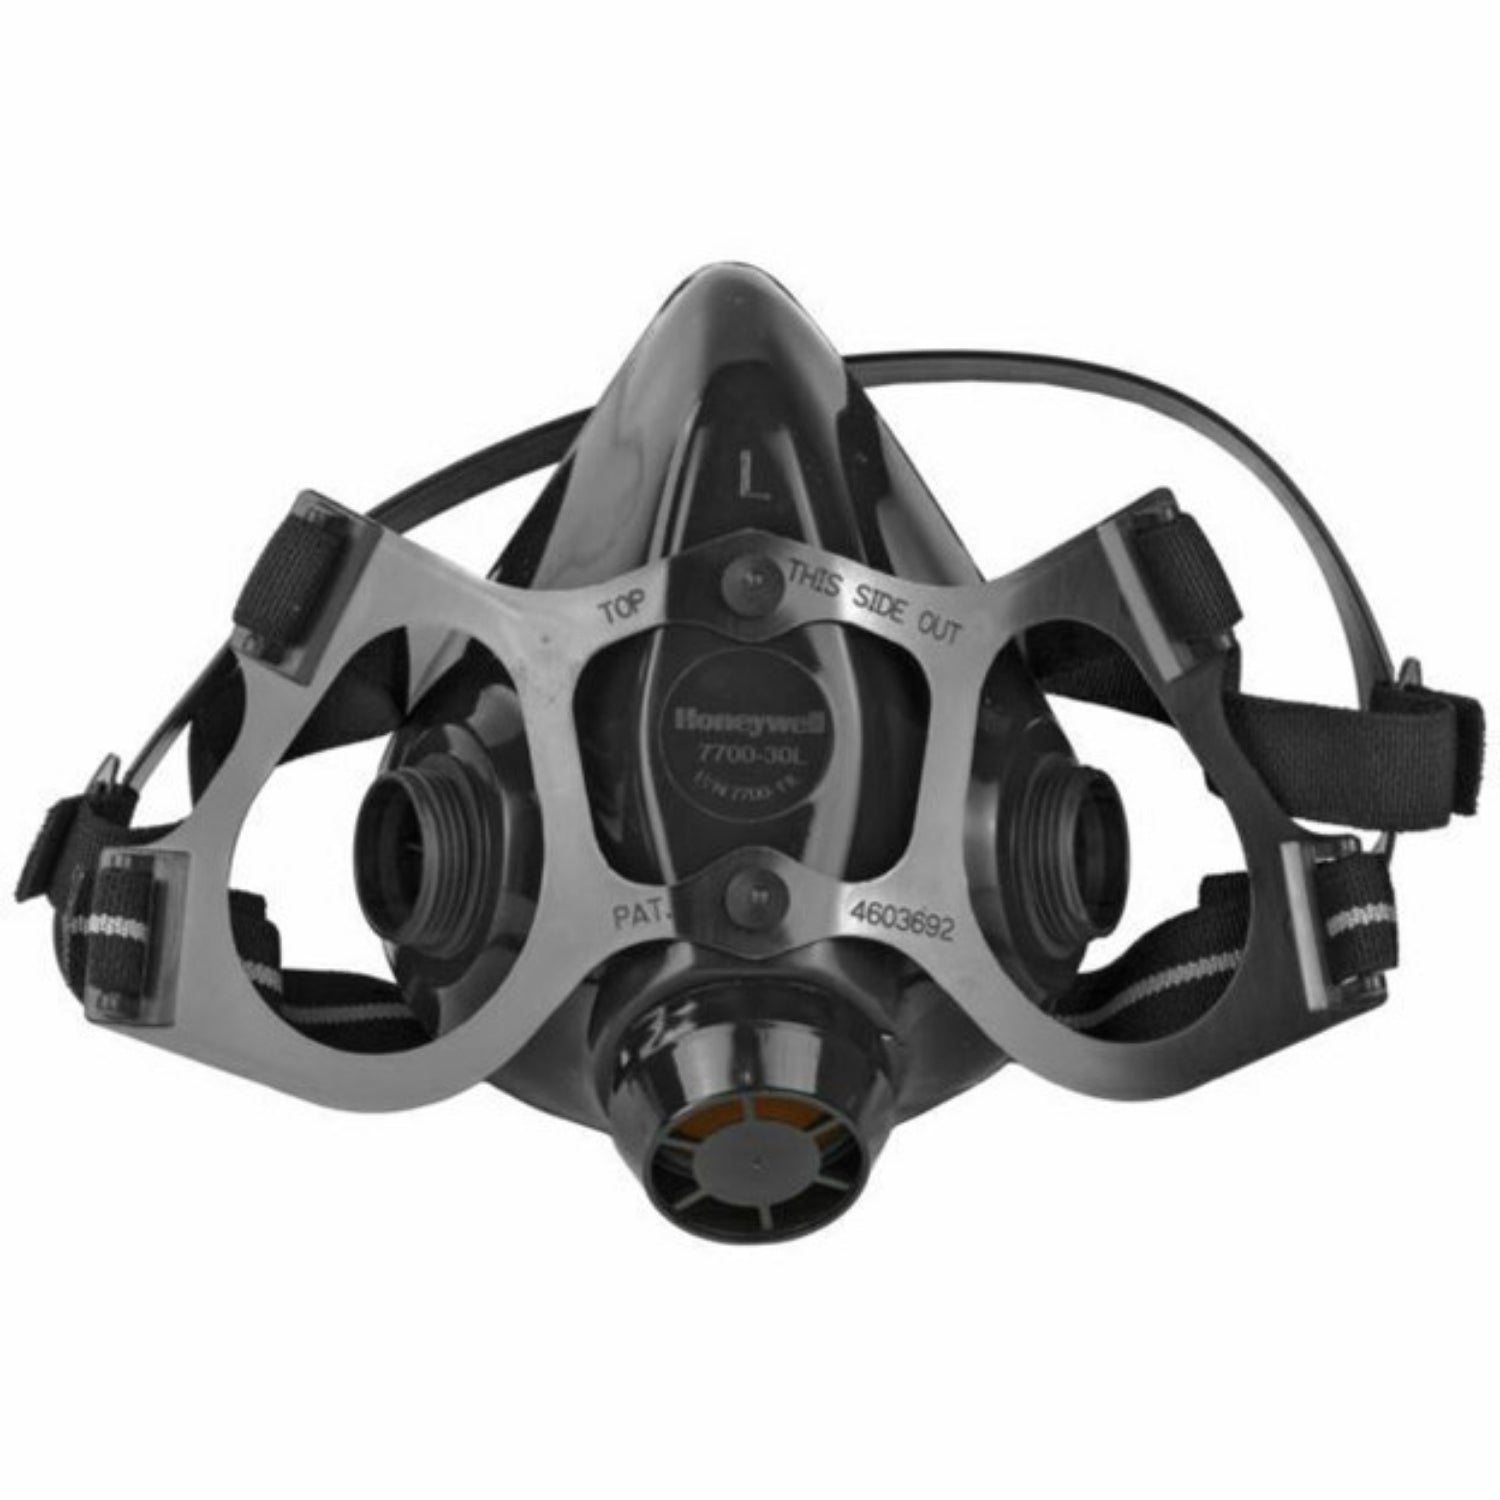 HONEYWELL  7700 Series Half Mask Respirator - Resists Particulates, Chemical, Contamination and Gas, Cradle Suspension, Silicone - Size Large